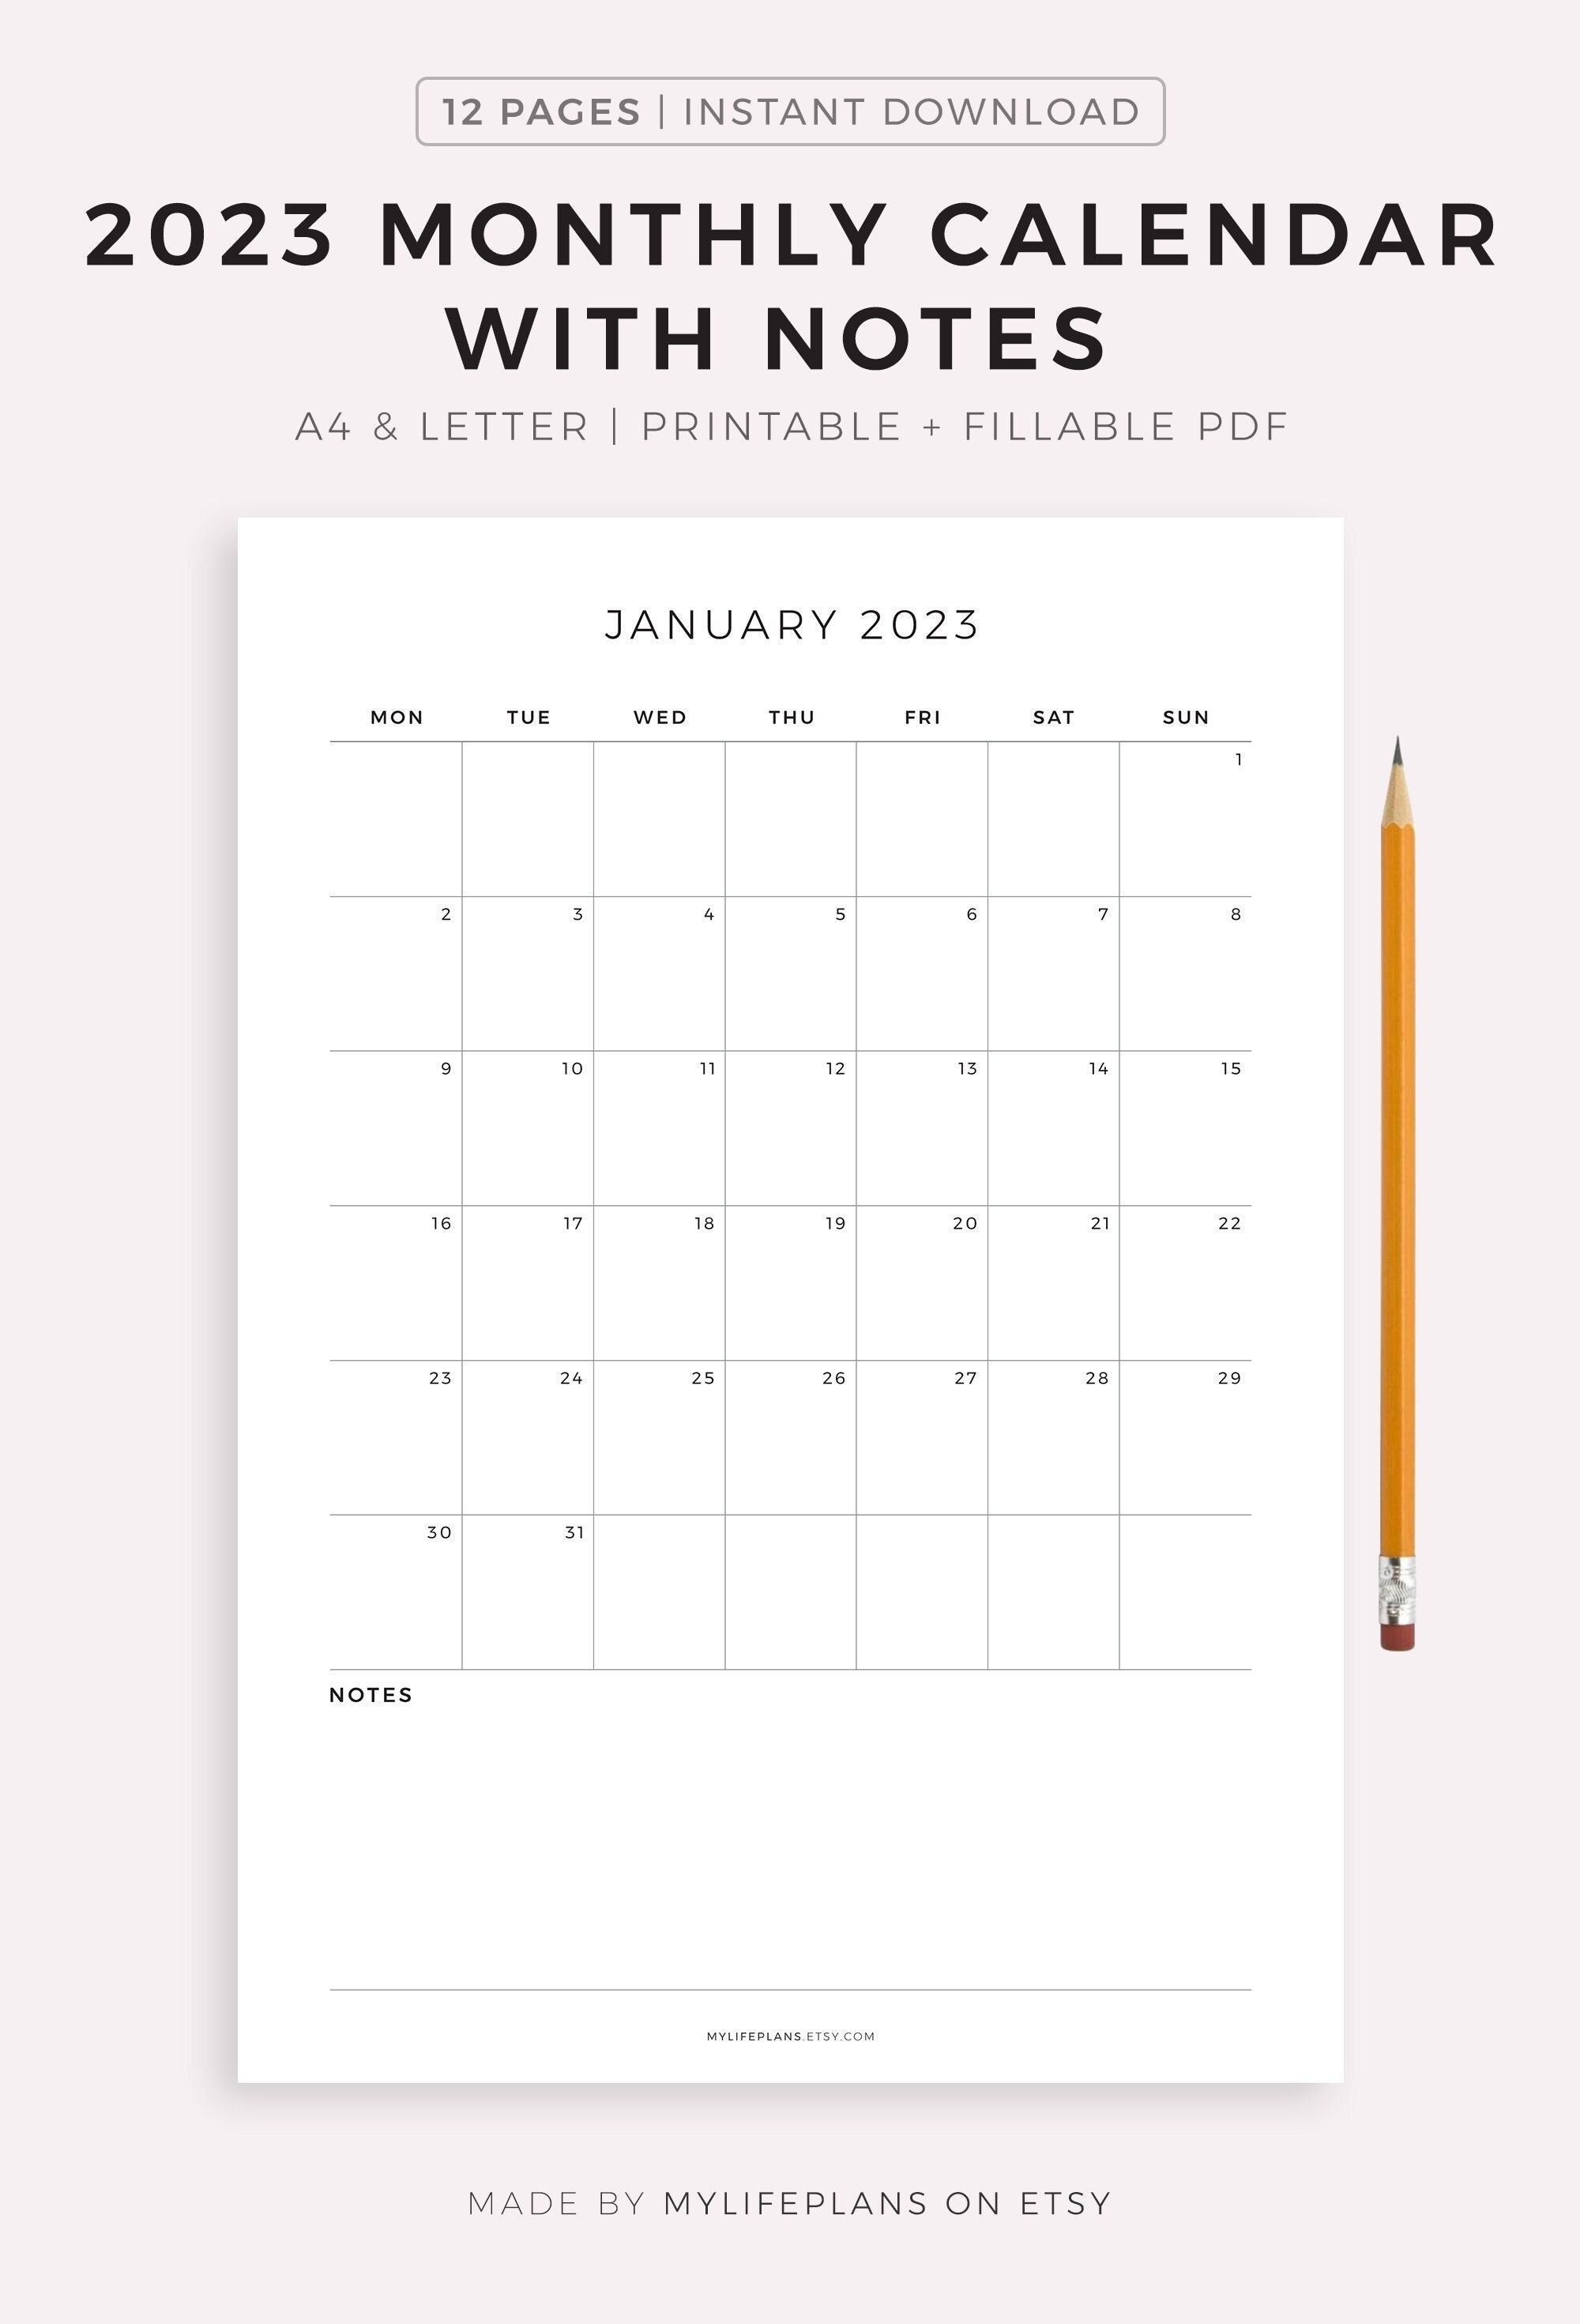 Buy 2023 Monthly Calendar With Notes Printable Calendar Template Online In  India - Etsy